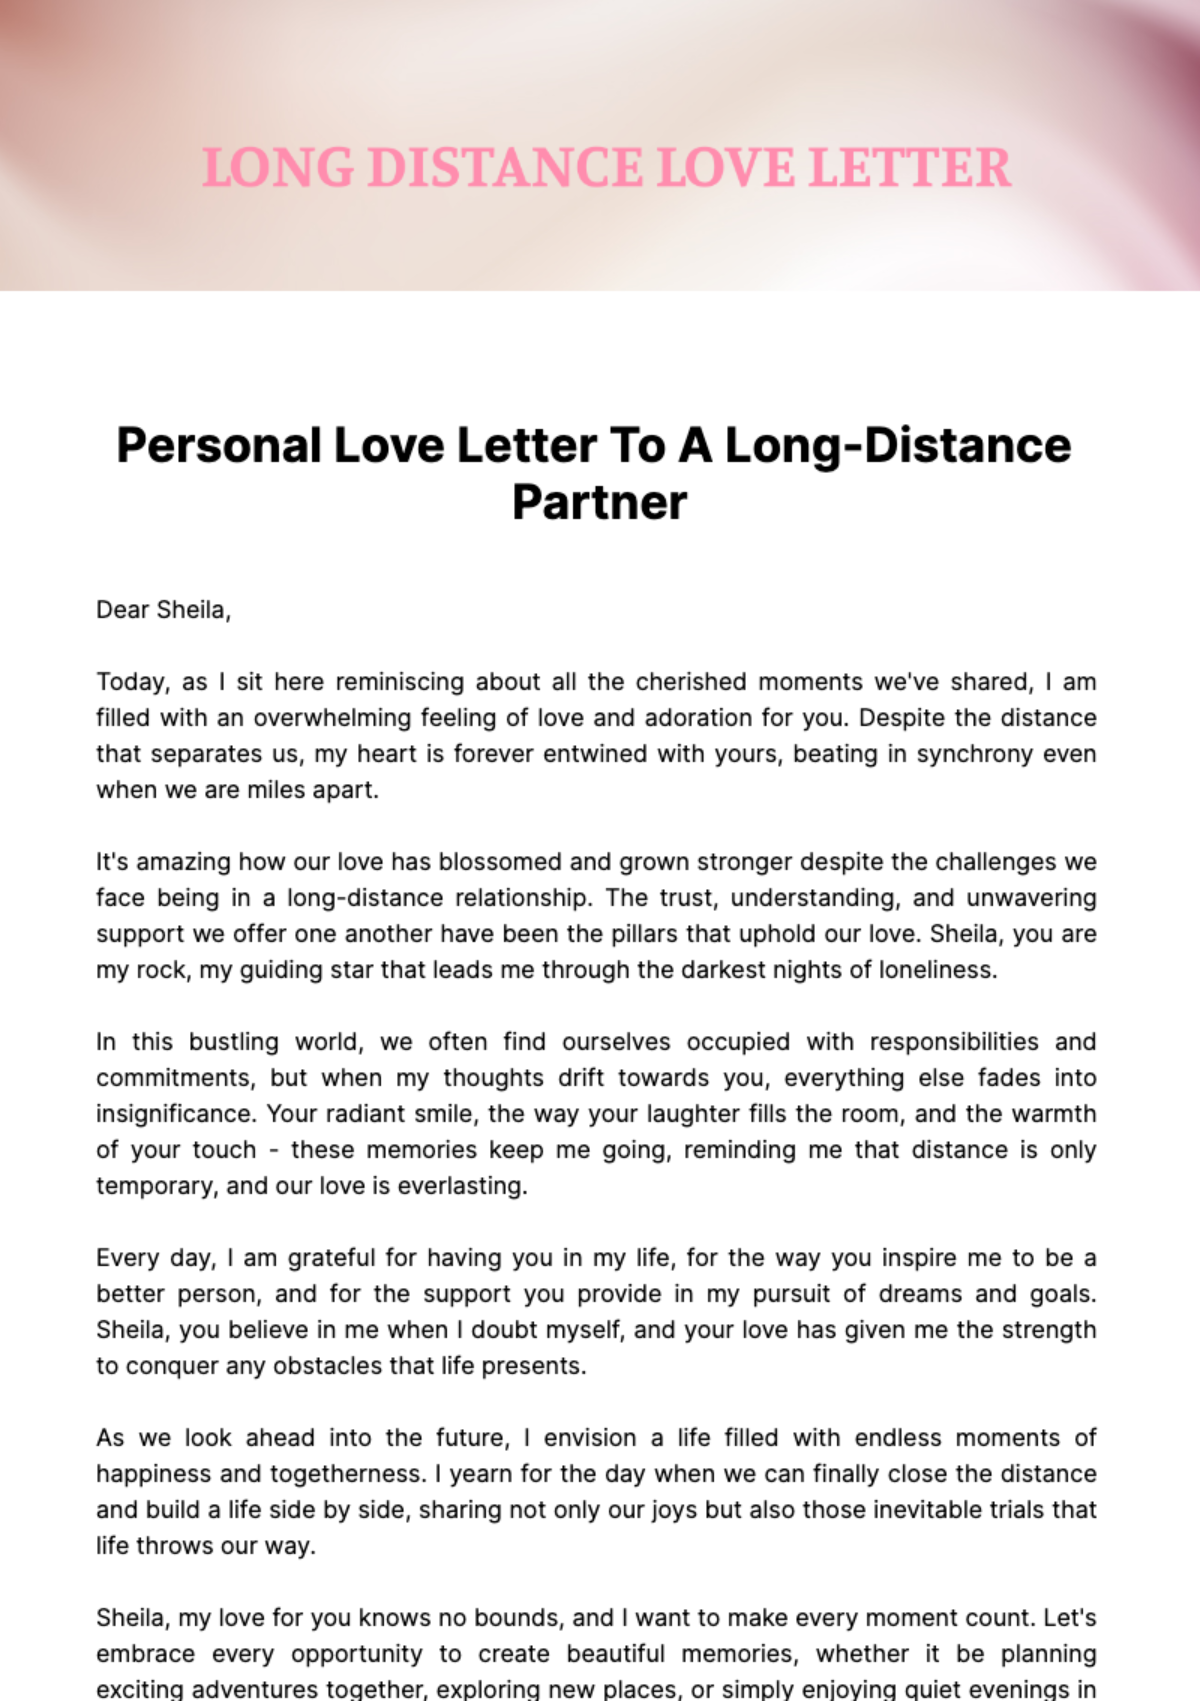 Personal Love Letter to a Long-Distance Partner  Template